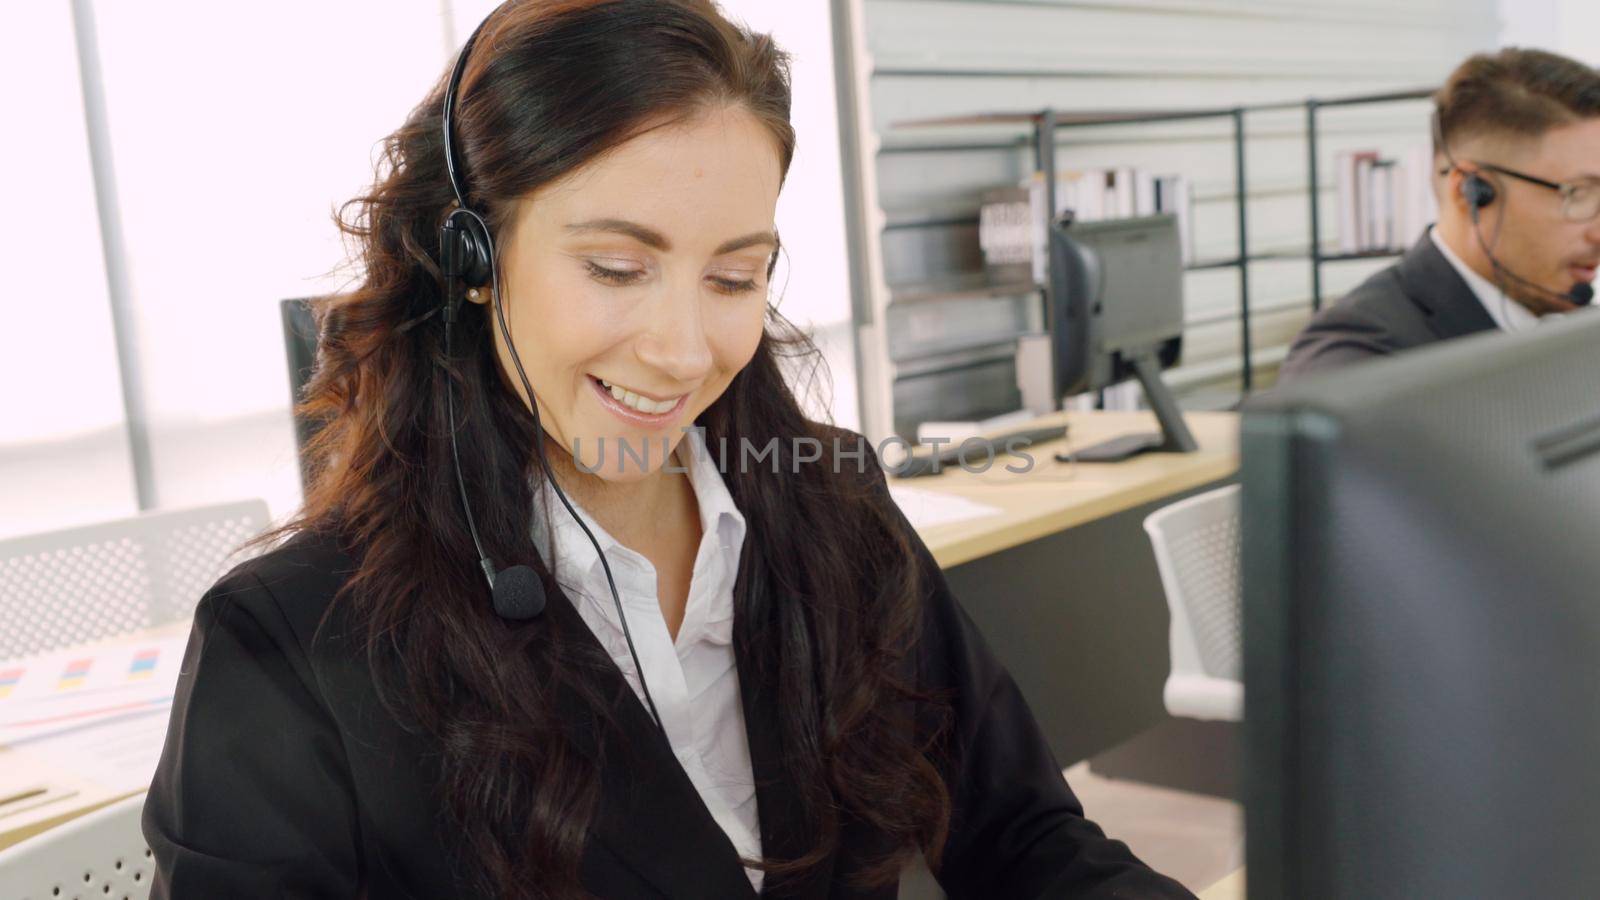 Business people wearing headset working in office by biancoblue